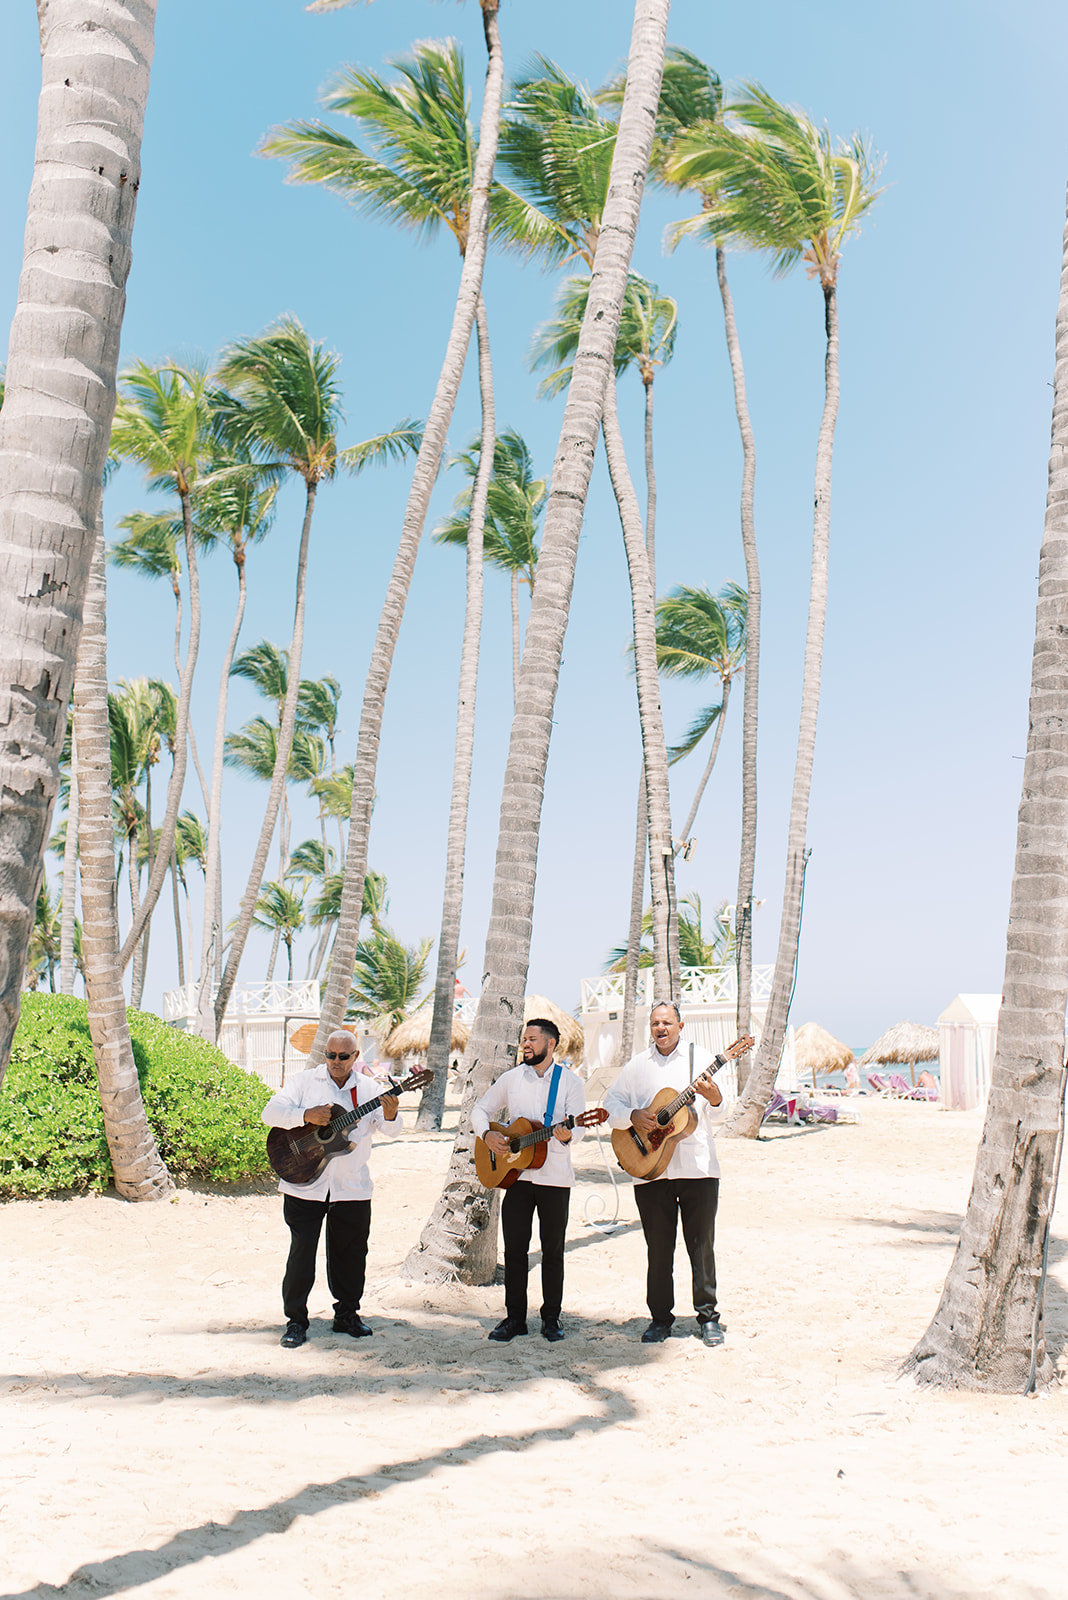 Amanda and Nate intimate beach destination wedding in Punta Cana at Breathless Resort in the Dominican Republic